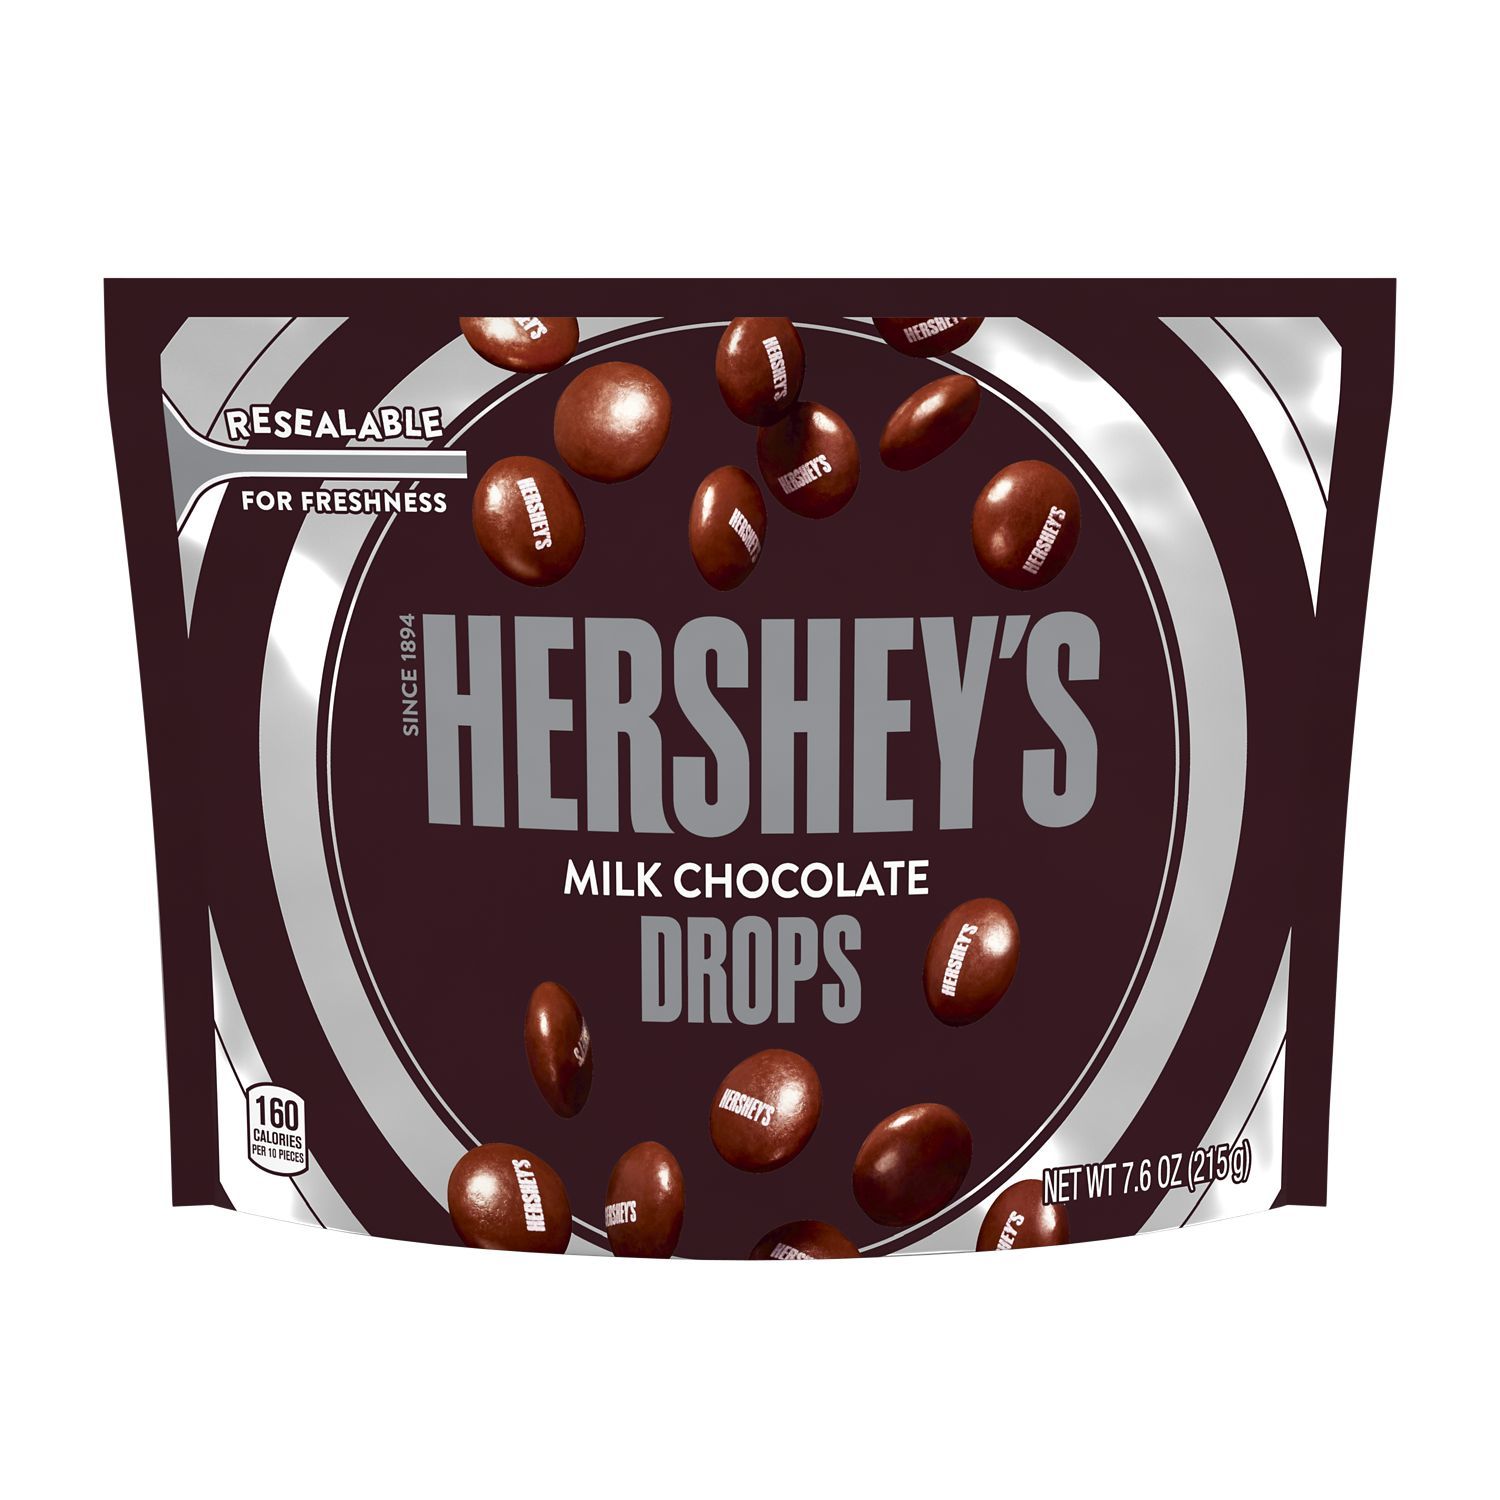 Hershey's, Milk Chocolate Drops Candy, 7.6 oz, Resealable Bag - image 1 of 2